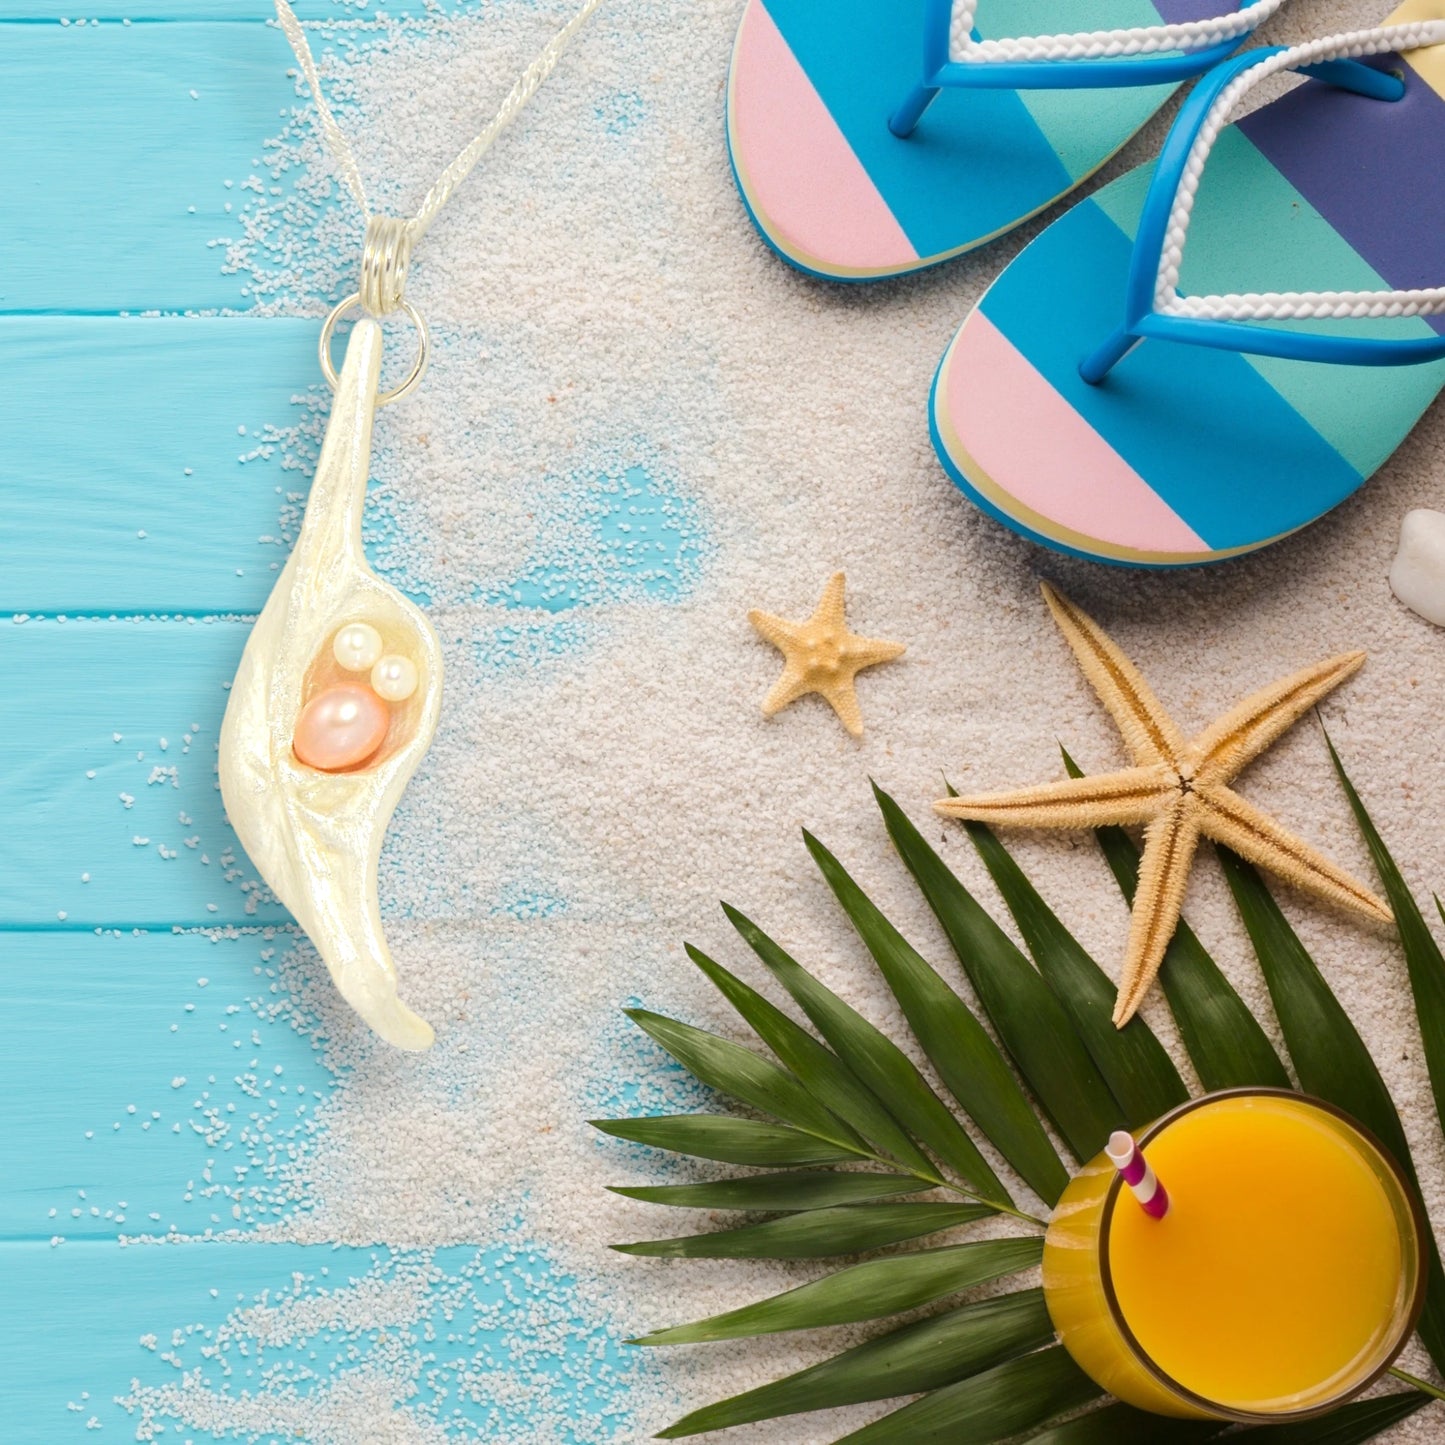 This natural seashell pendant has a real 7-8mm pink freshwater pearl and two baby pearls. The pendant is shown on a turquoise deck with sandals, starfish and a cold orange drink.